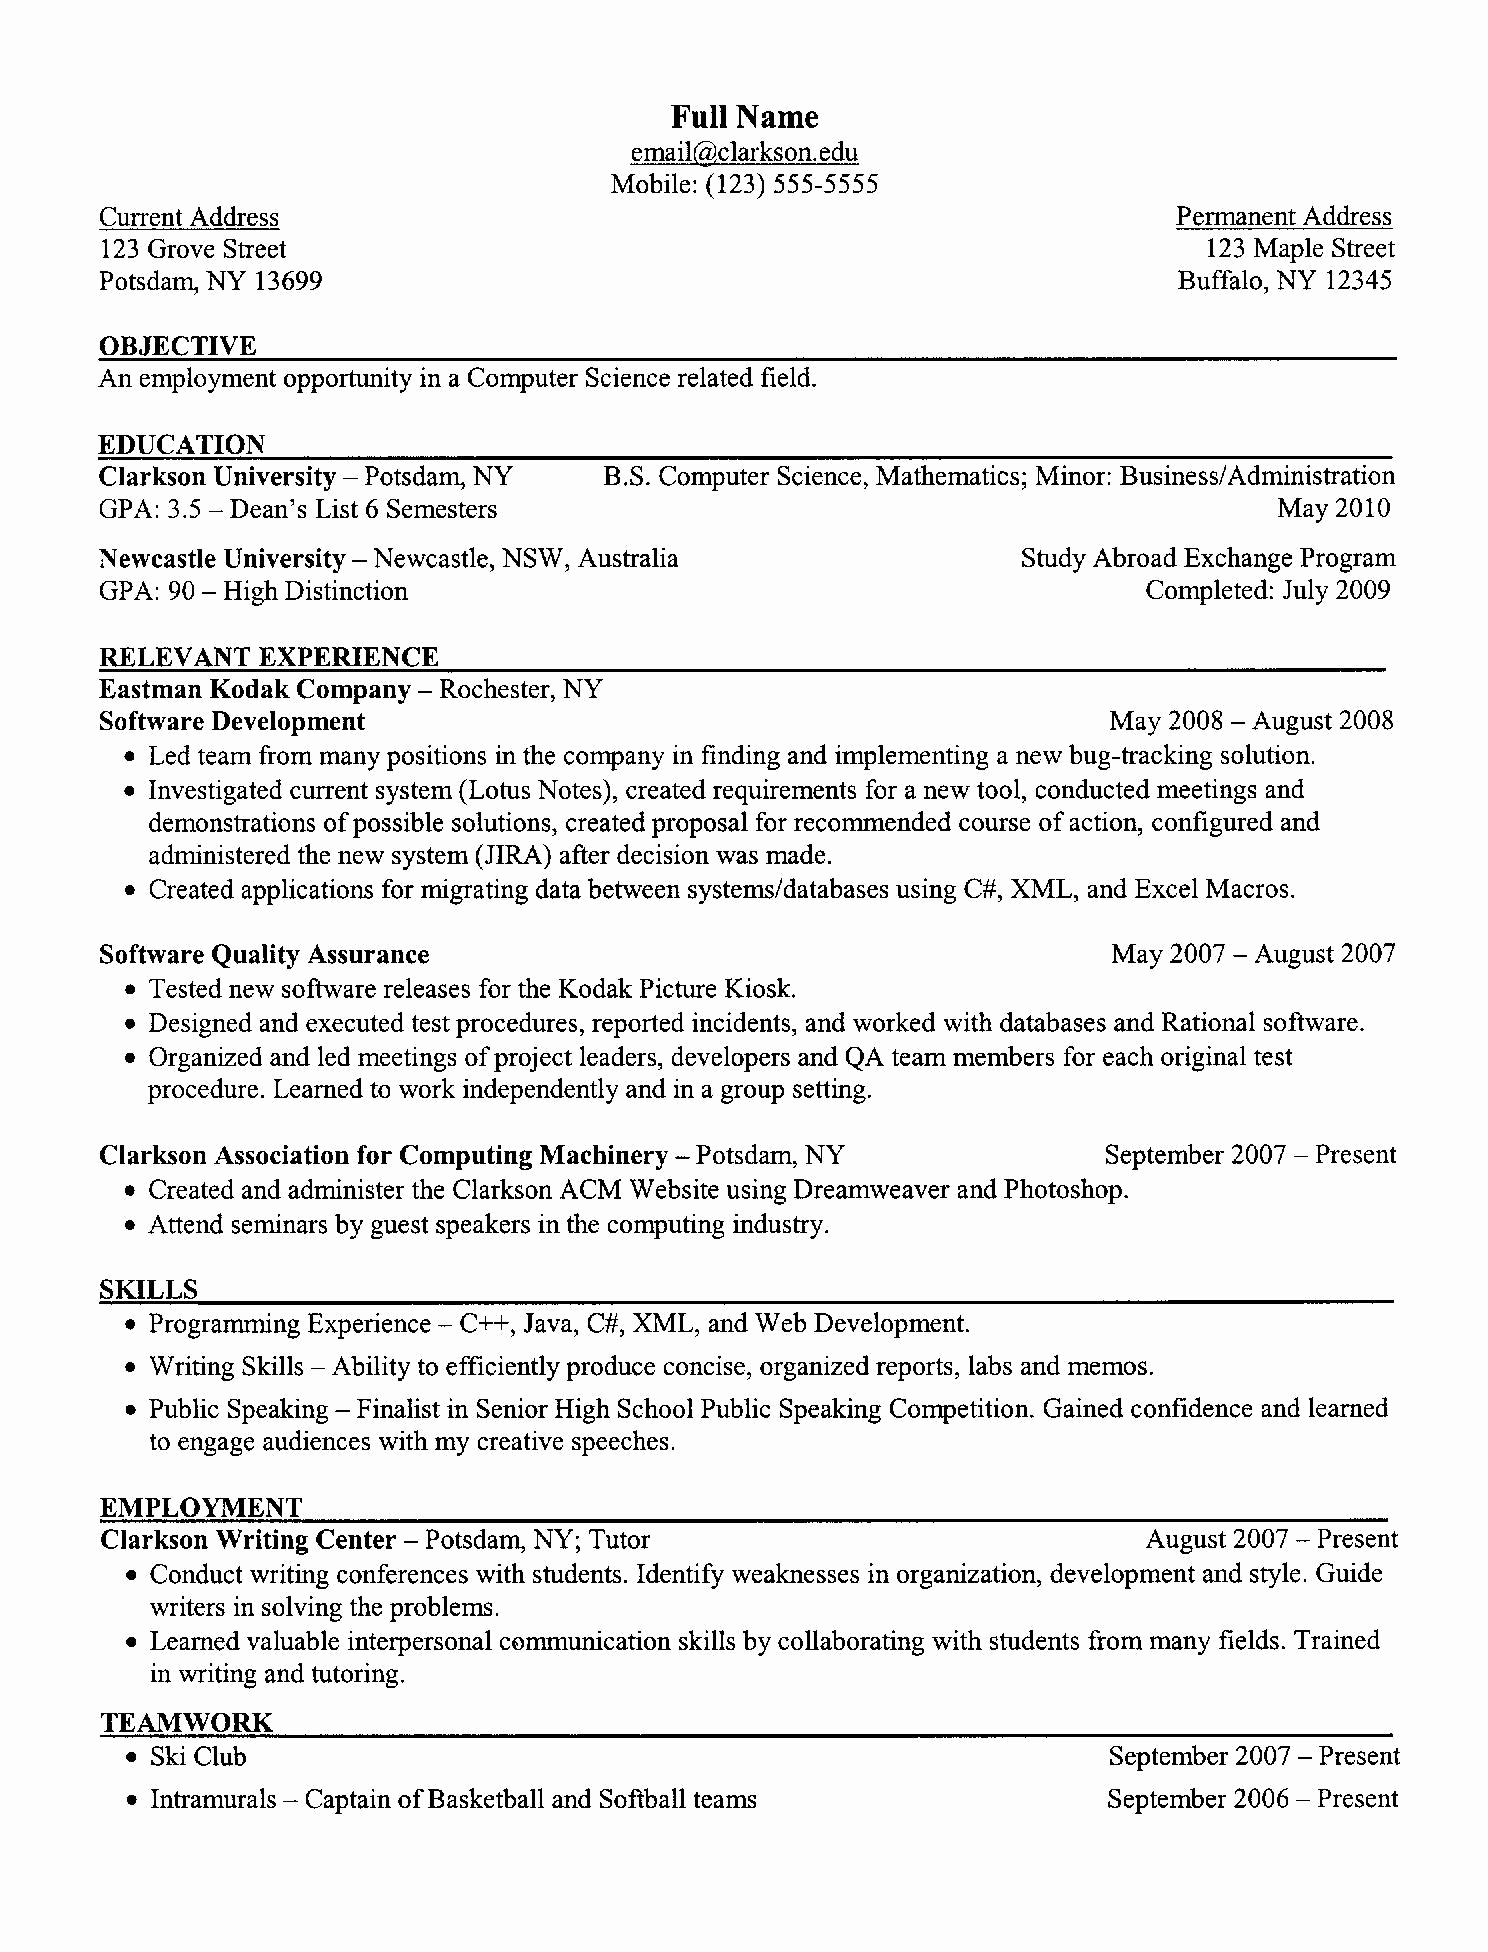 Sample Computer Science Resume Awesome Examples A Resume Clarkson University Senior Puter